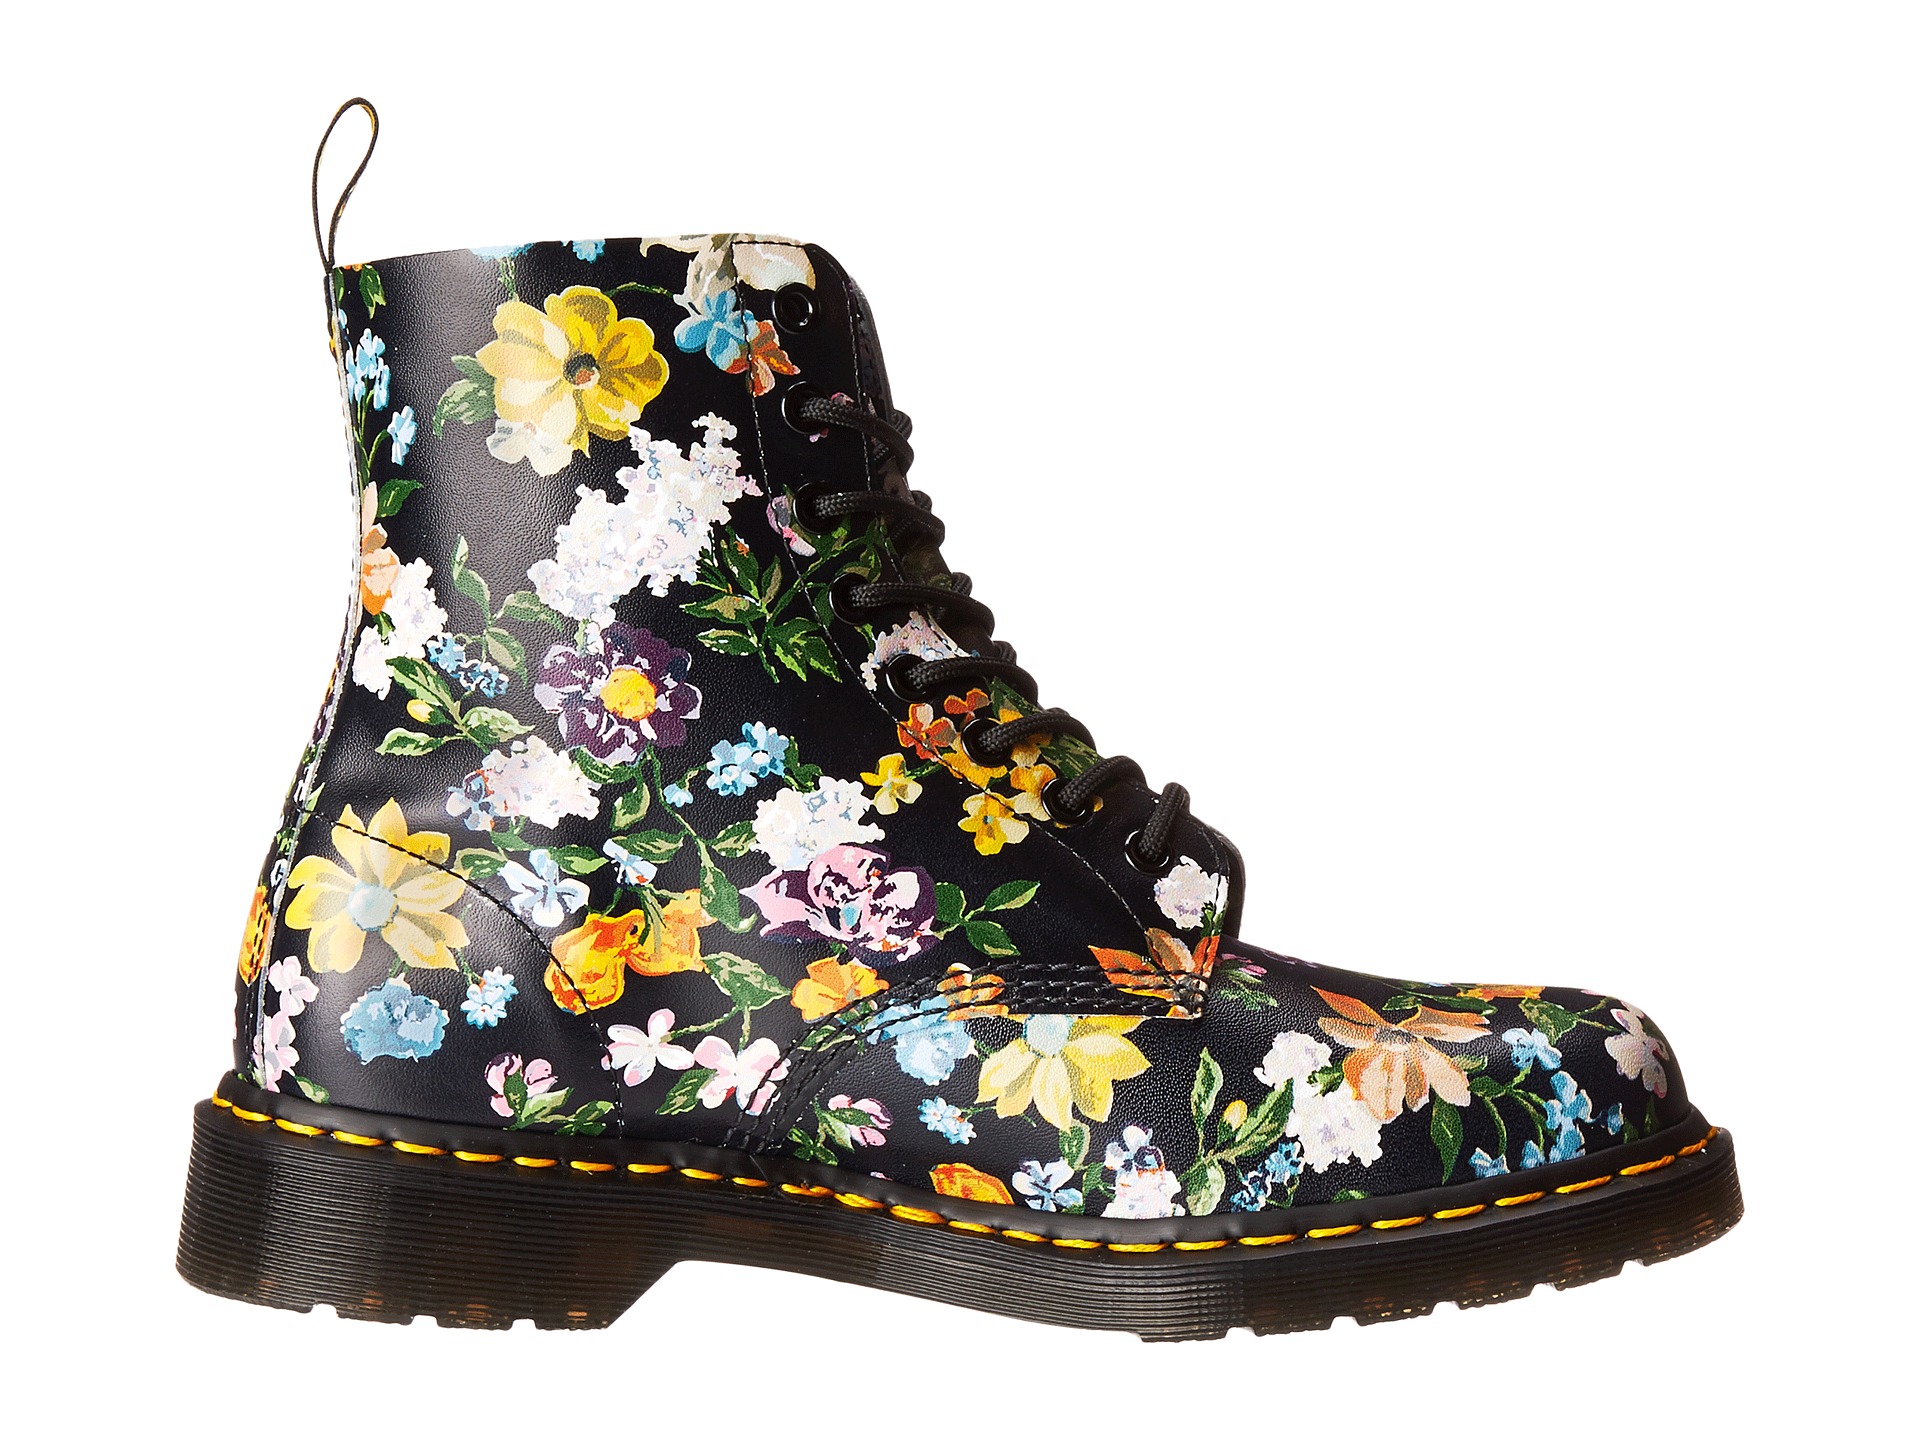 Dr. Martens Pascal Darcy Floral 8-Eye Boot at Zappos.com